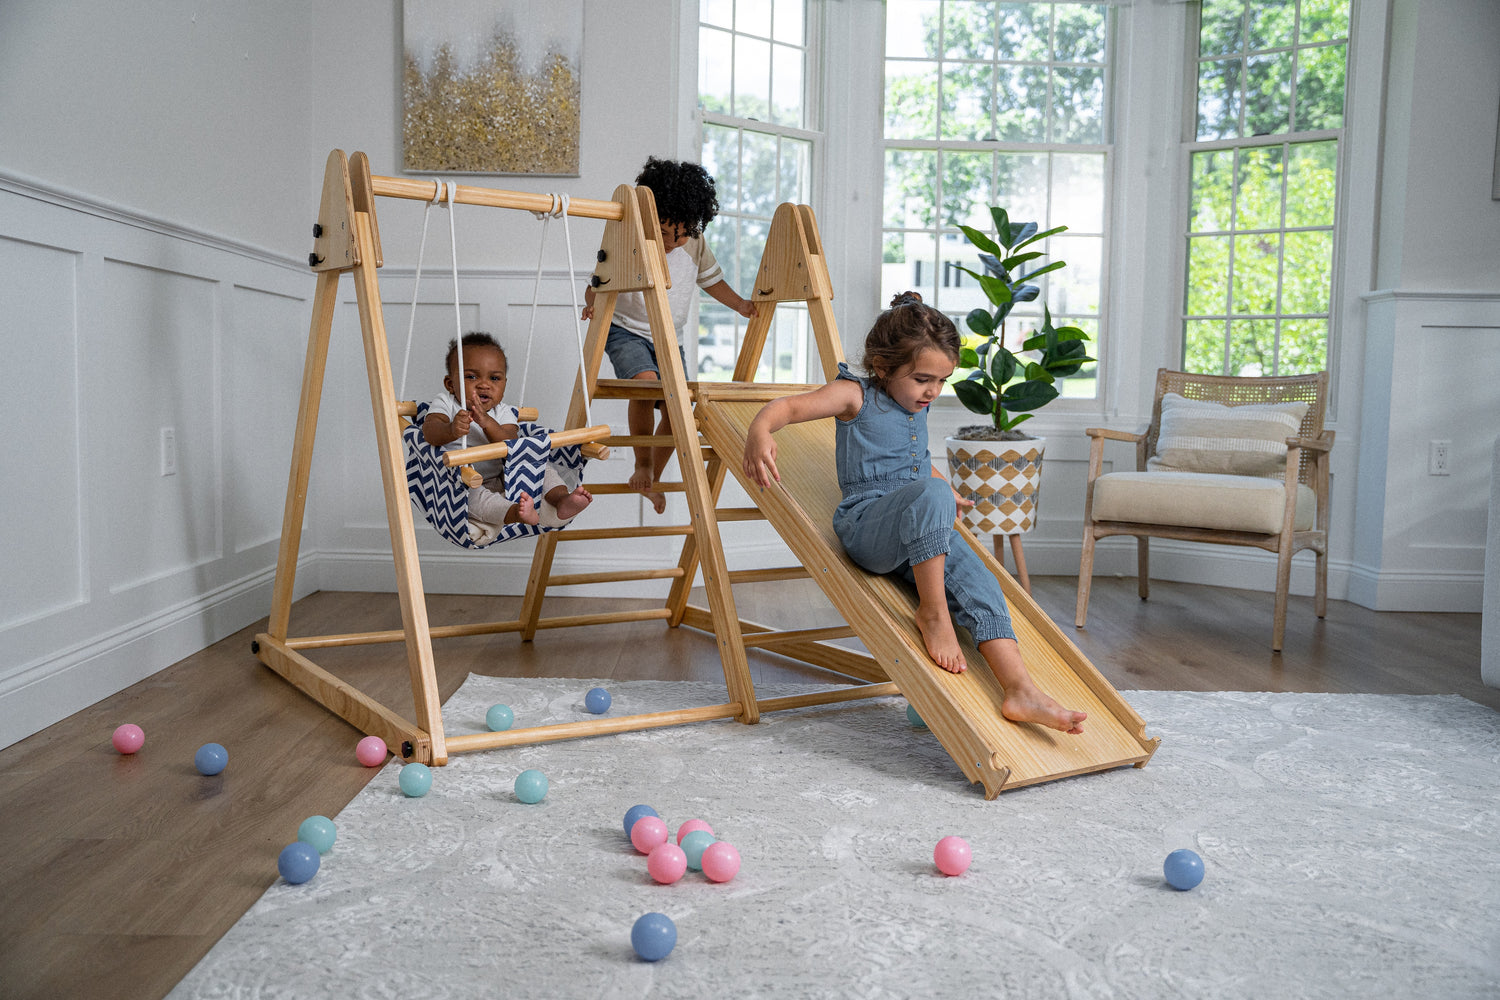 Avenlur's Juniper Real Wood Folding Playset - Frontal View - Featuring Interchangeable Wooden Swing Detail